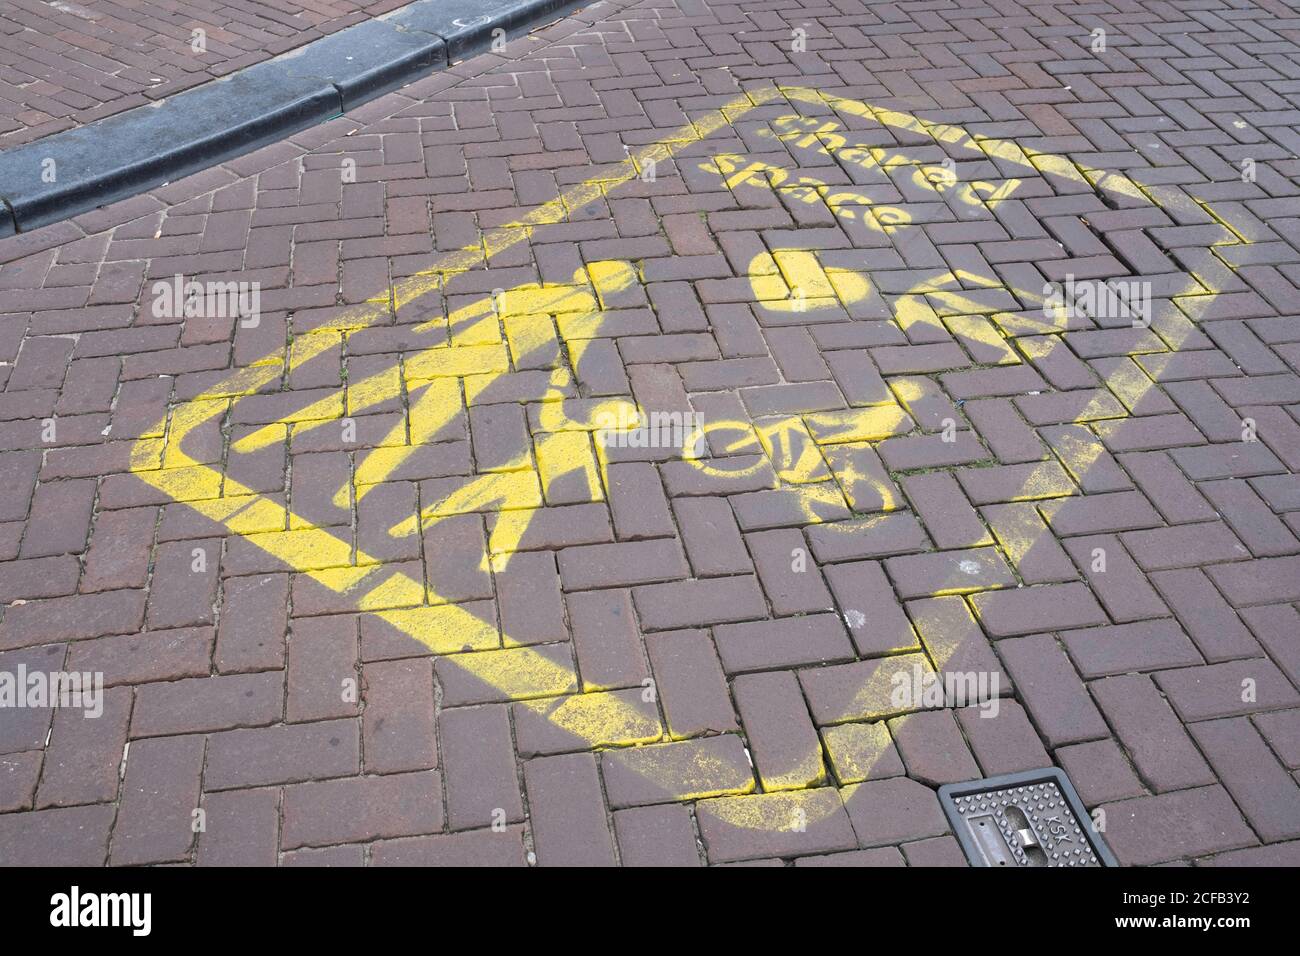 Yellow signs on the street indicate a Shared Space area in Amsterdam, a concept where priority and rules are lacking for traffic. Focus on the signs Stock Photo